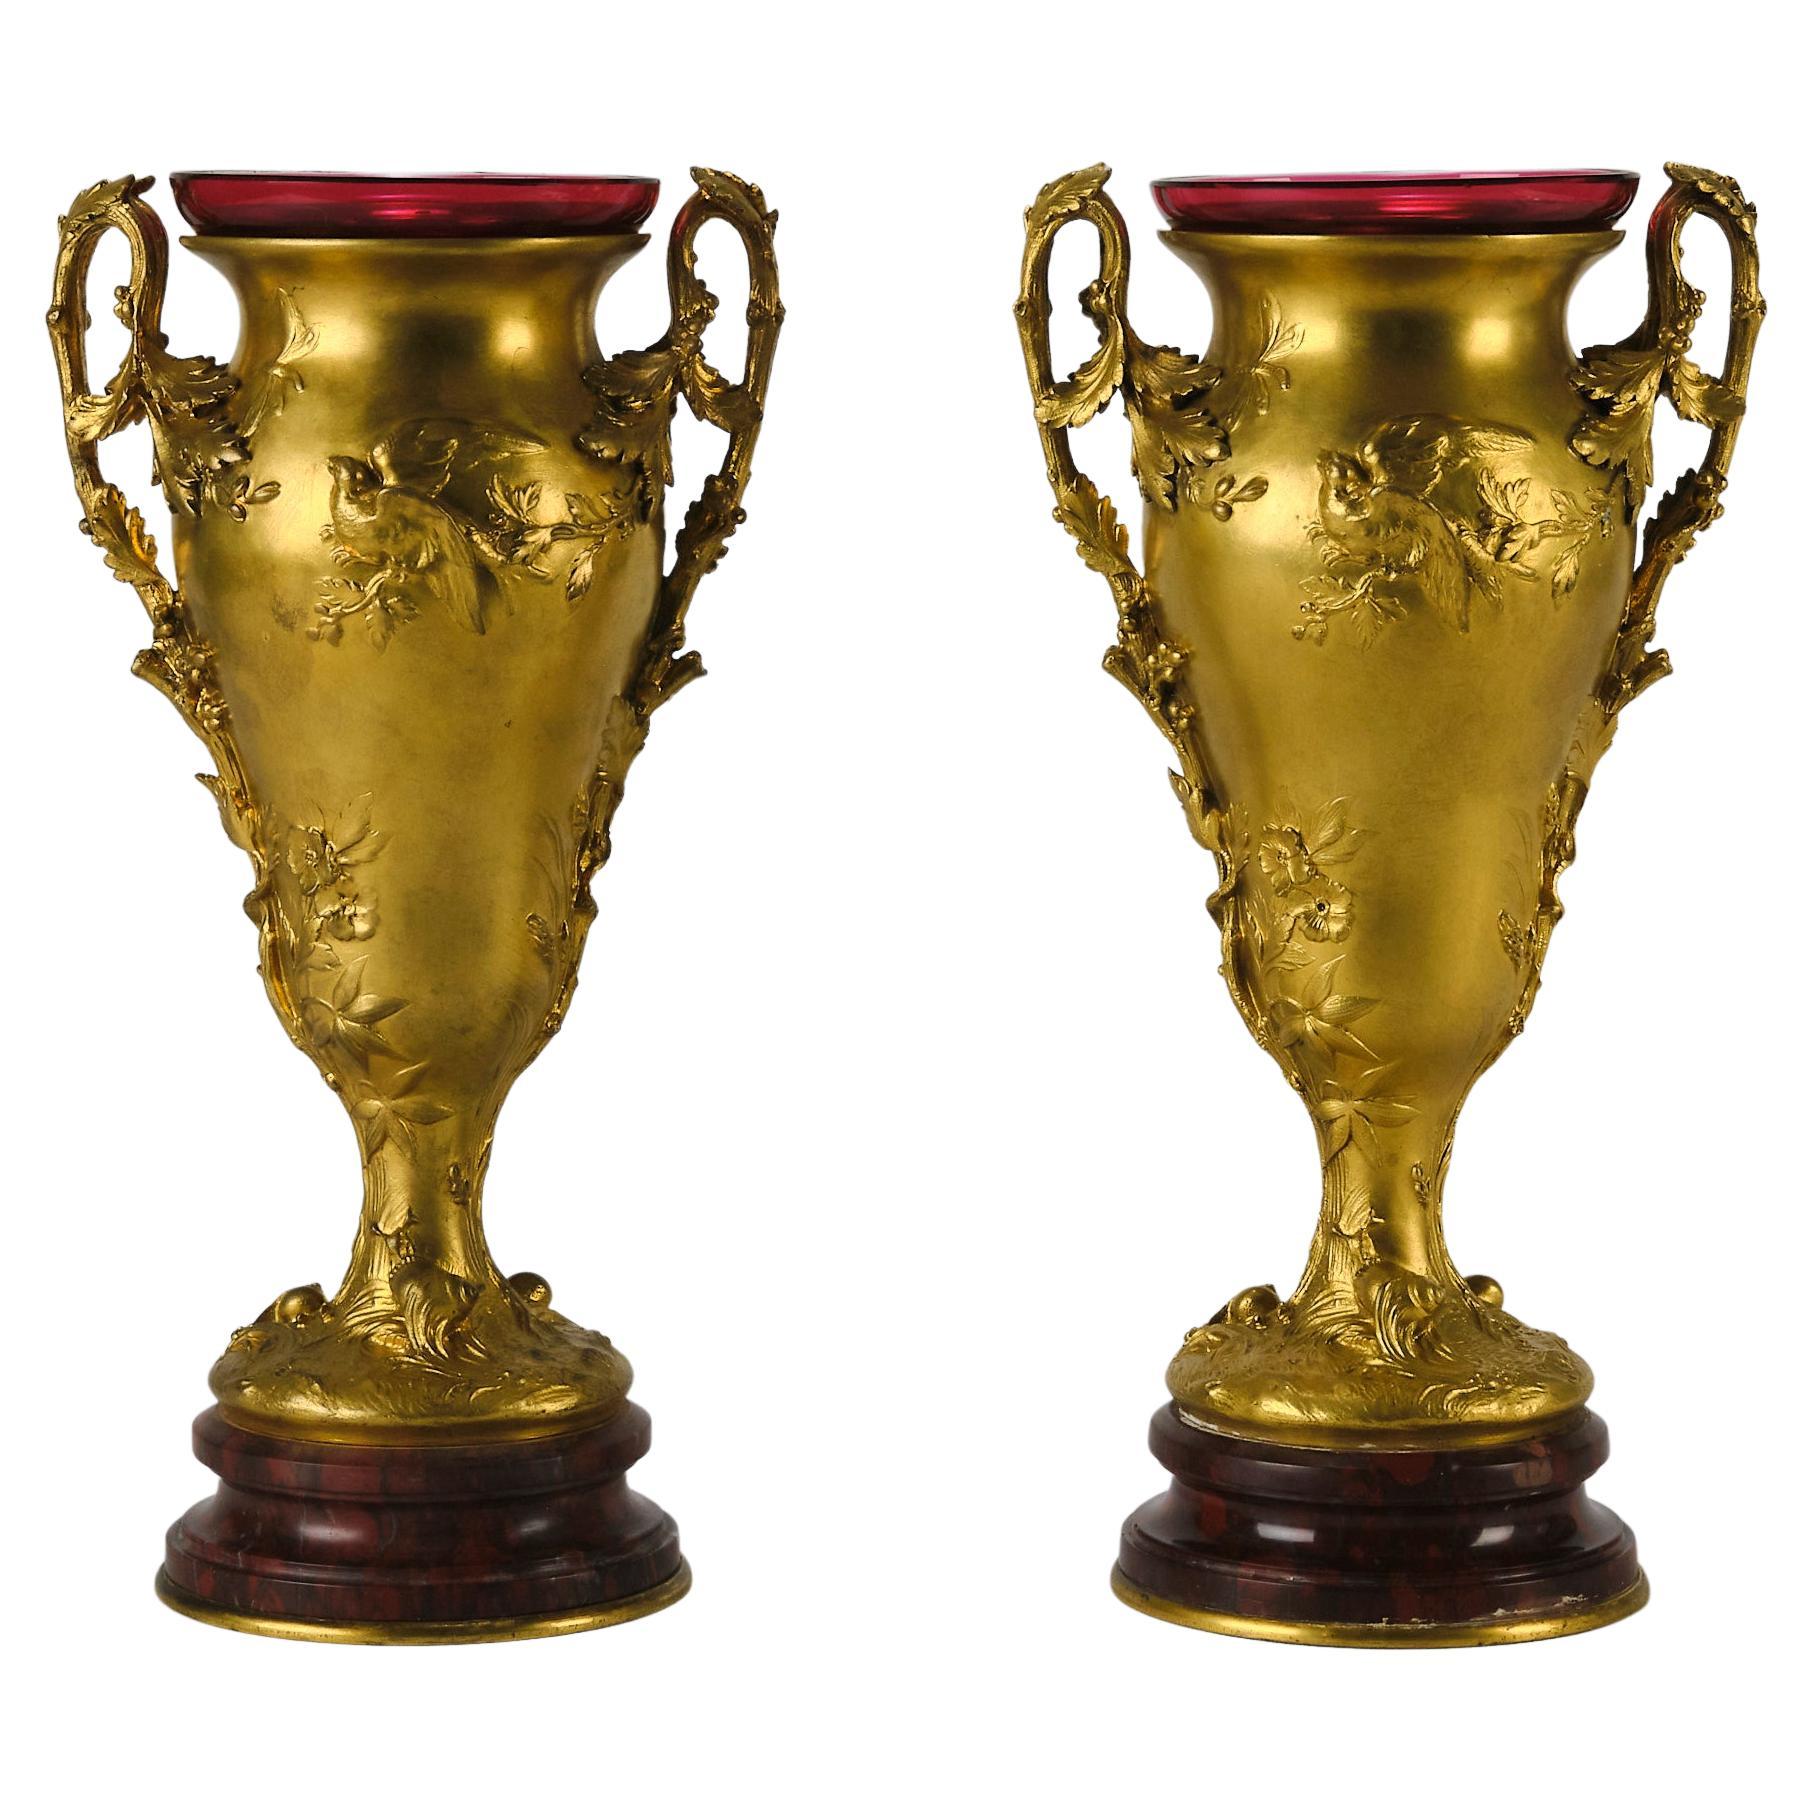 Early 20th Century Gilt Bronze "Decorative Vases" by Ferdinand Barbedienne For Sale